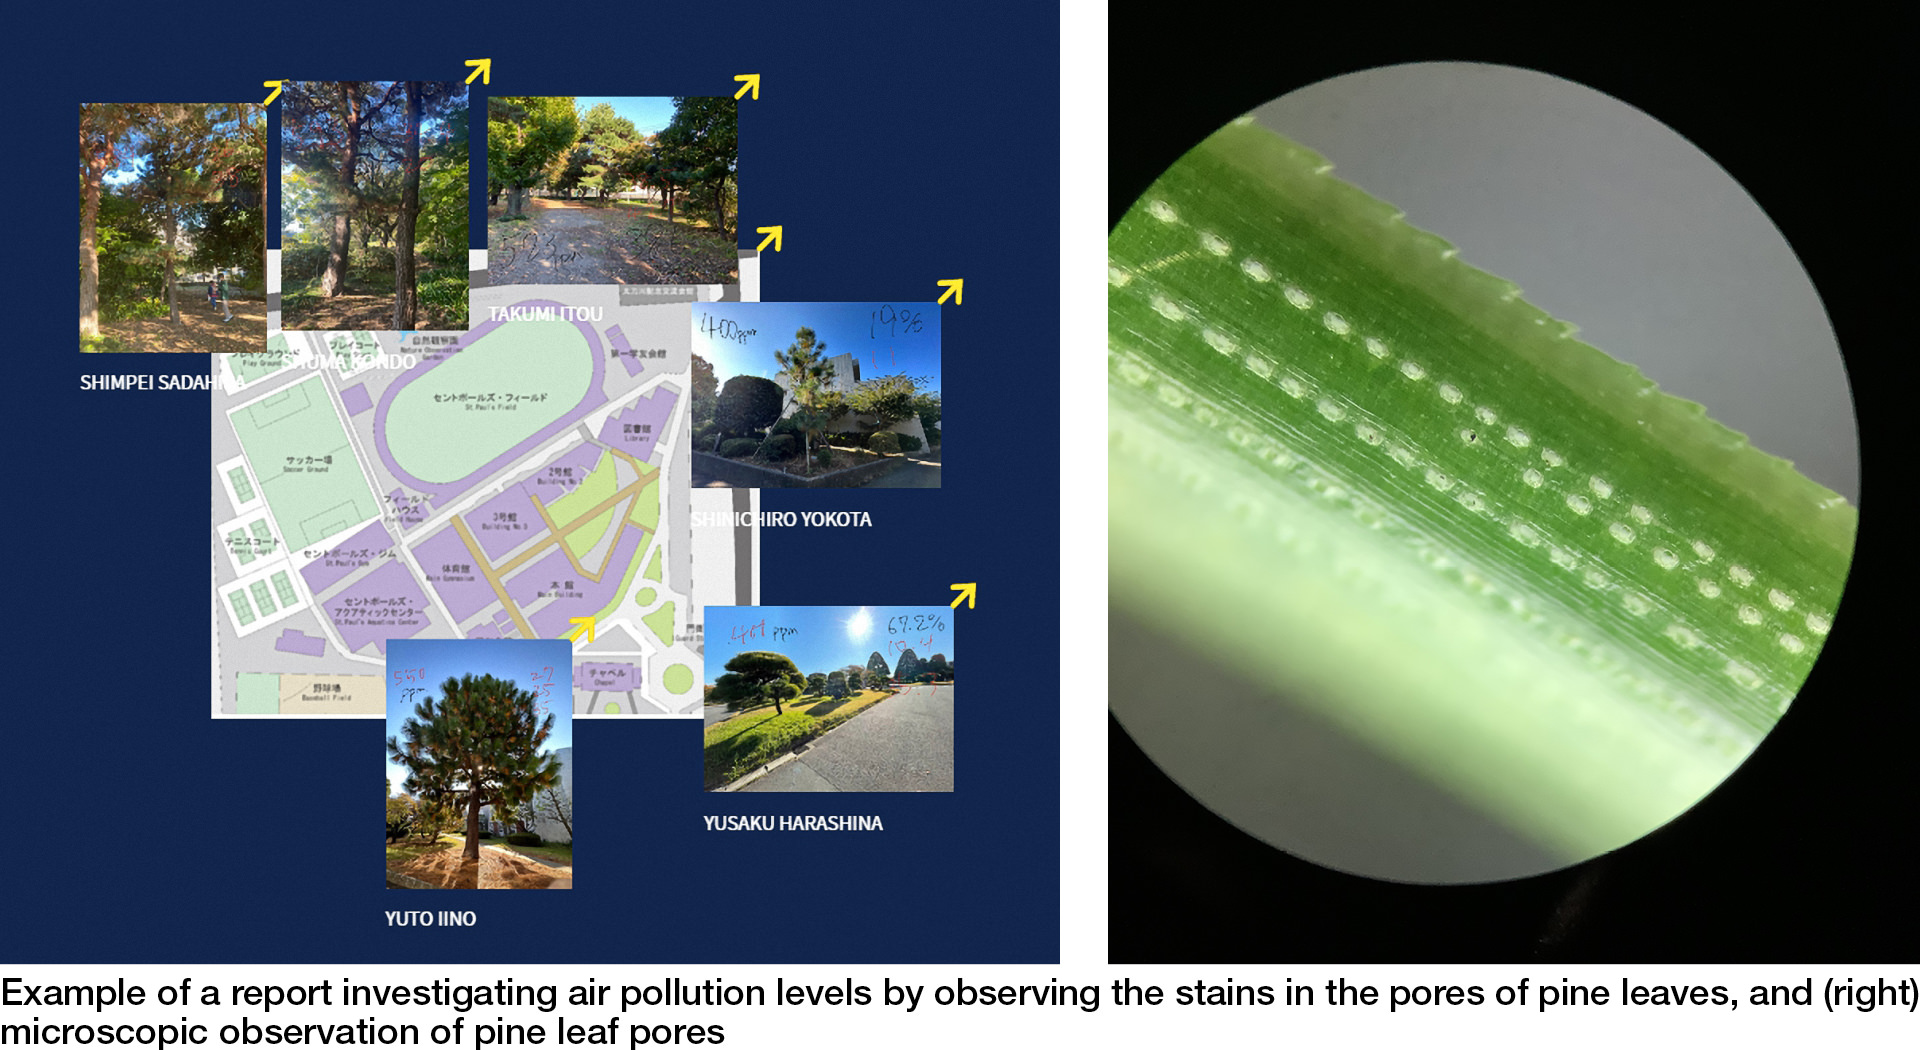 Example of a report investigating air pollution levels by observing the stains in the pores of pine leaves, and (right) microscopic observation of pine leaf pores